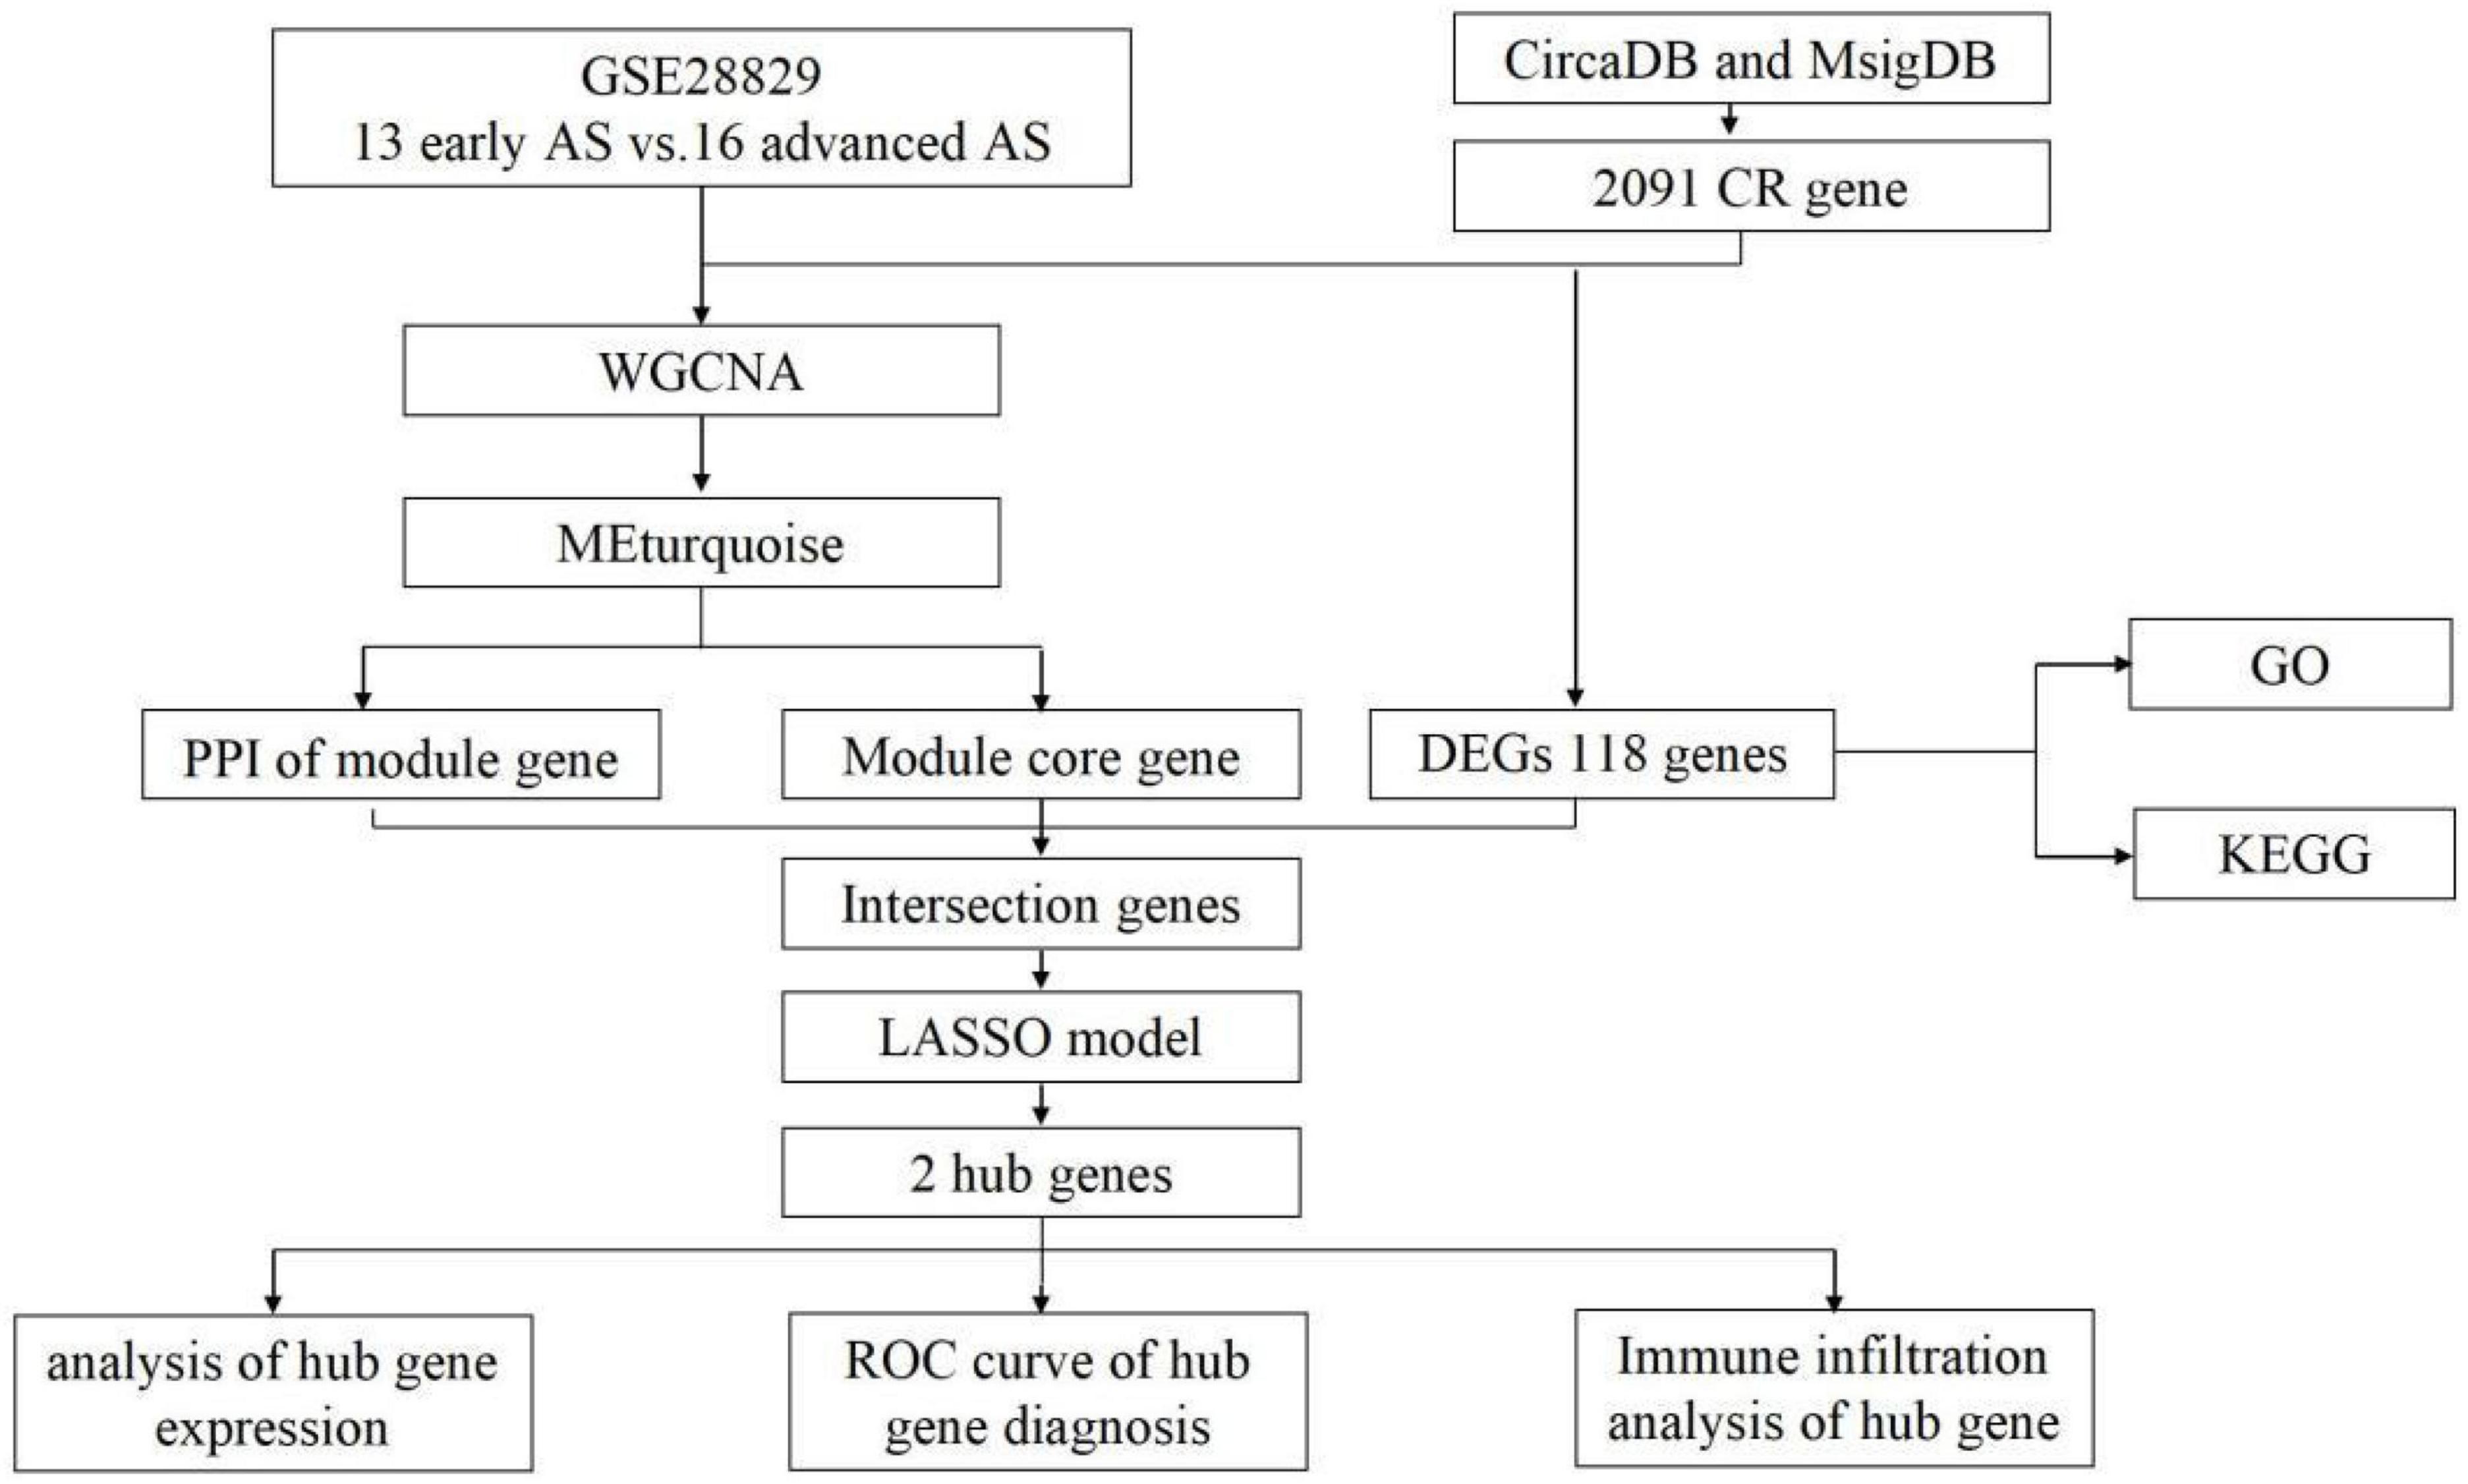 Screening for key genes in circadian regulation in advanced atherosclerosis: A bioinformatic analysis